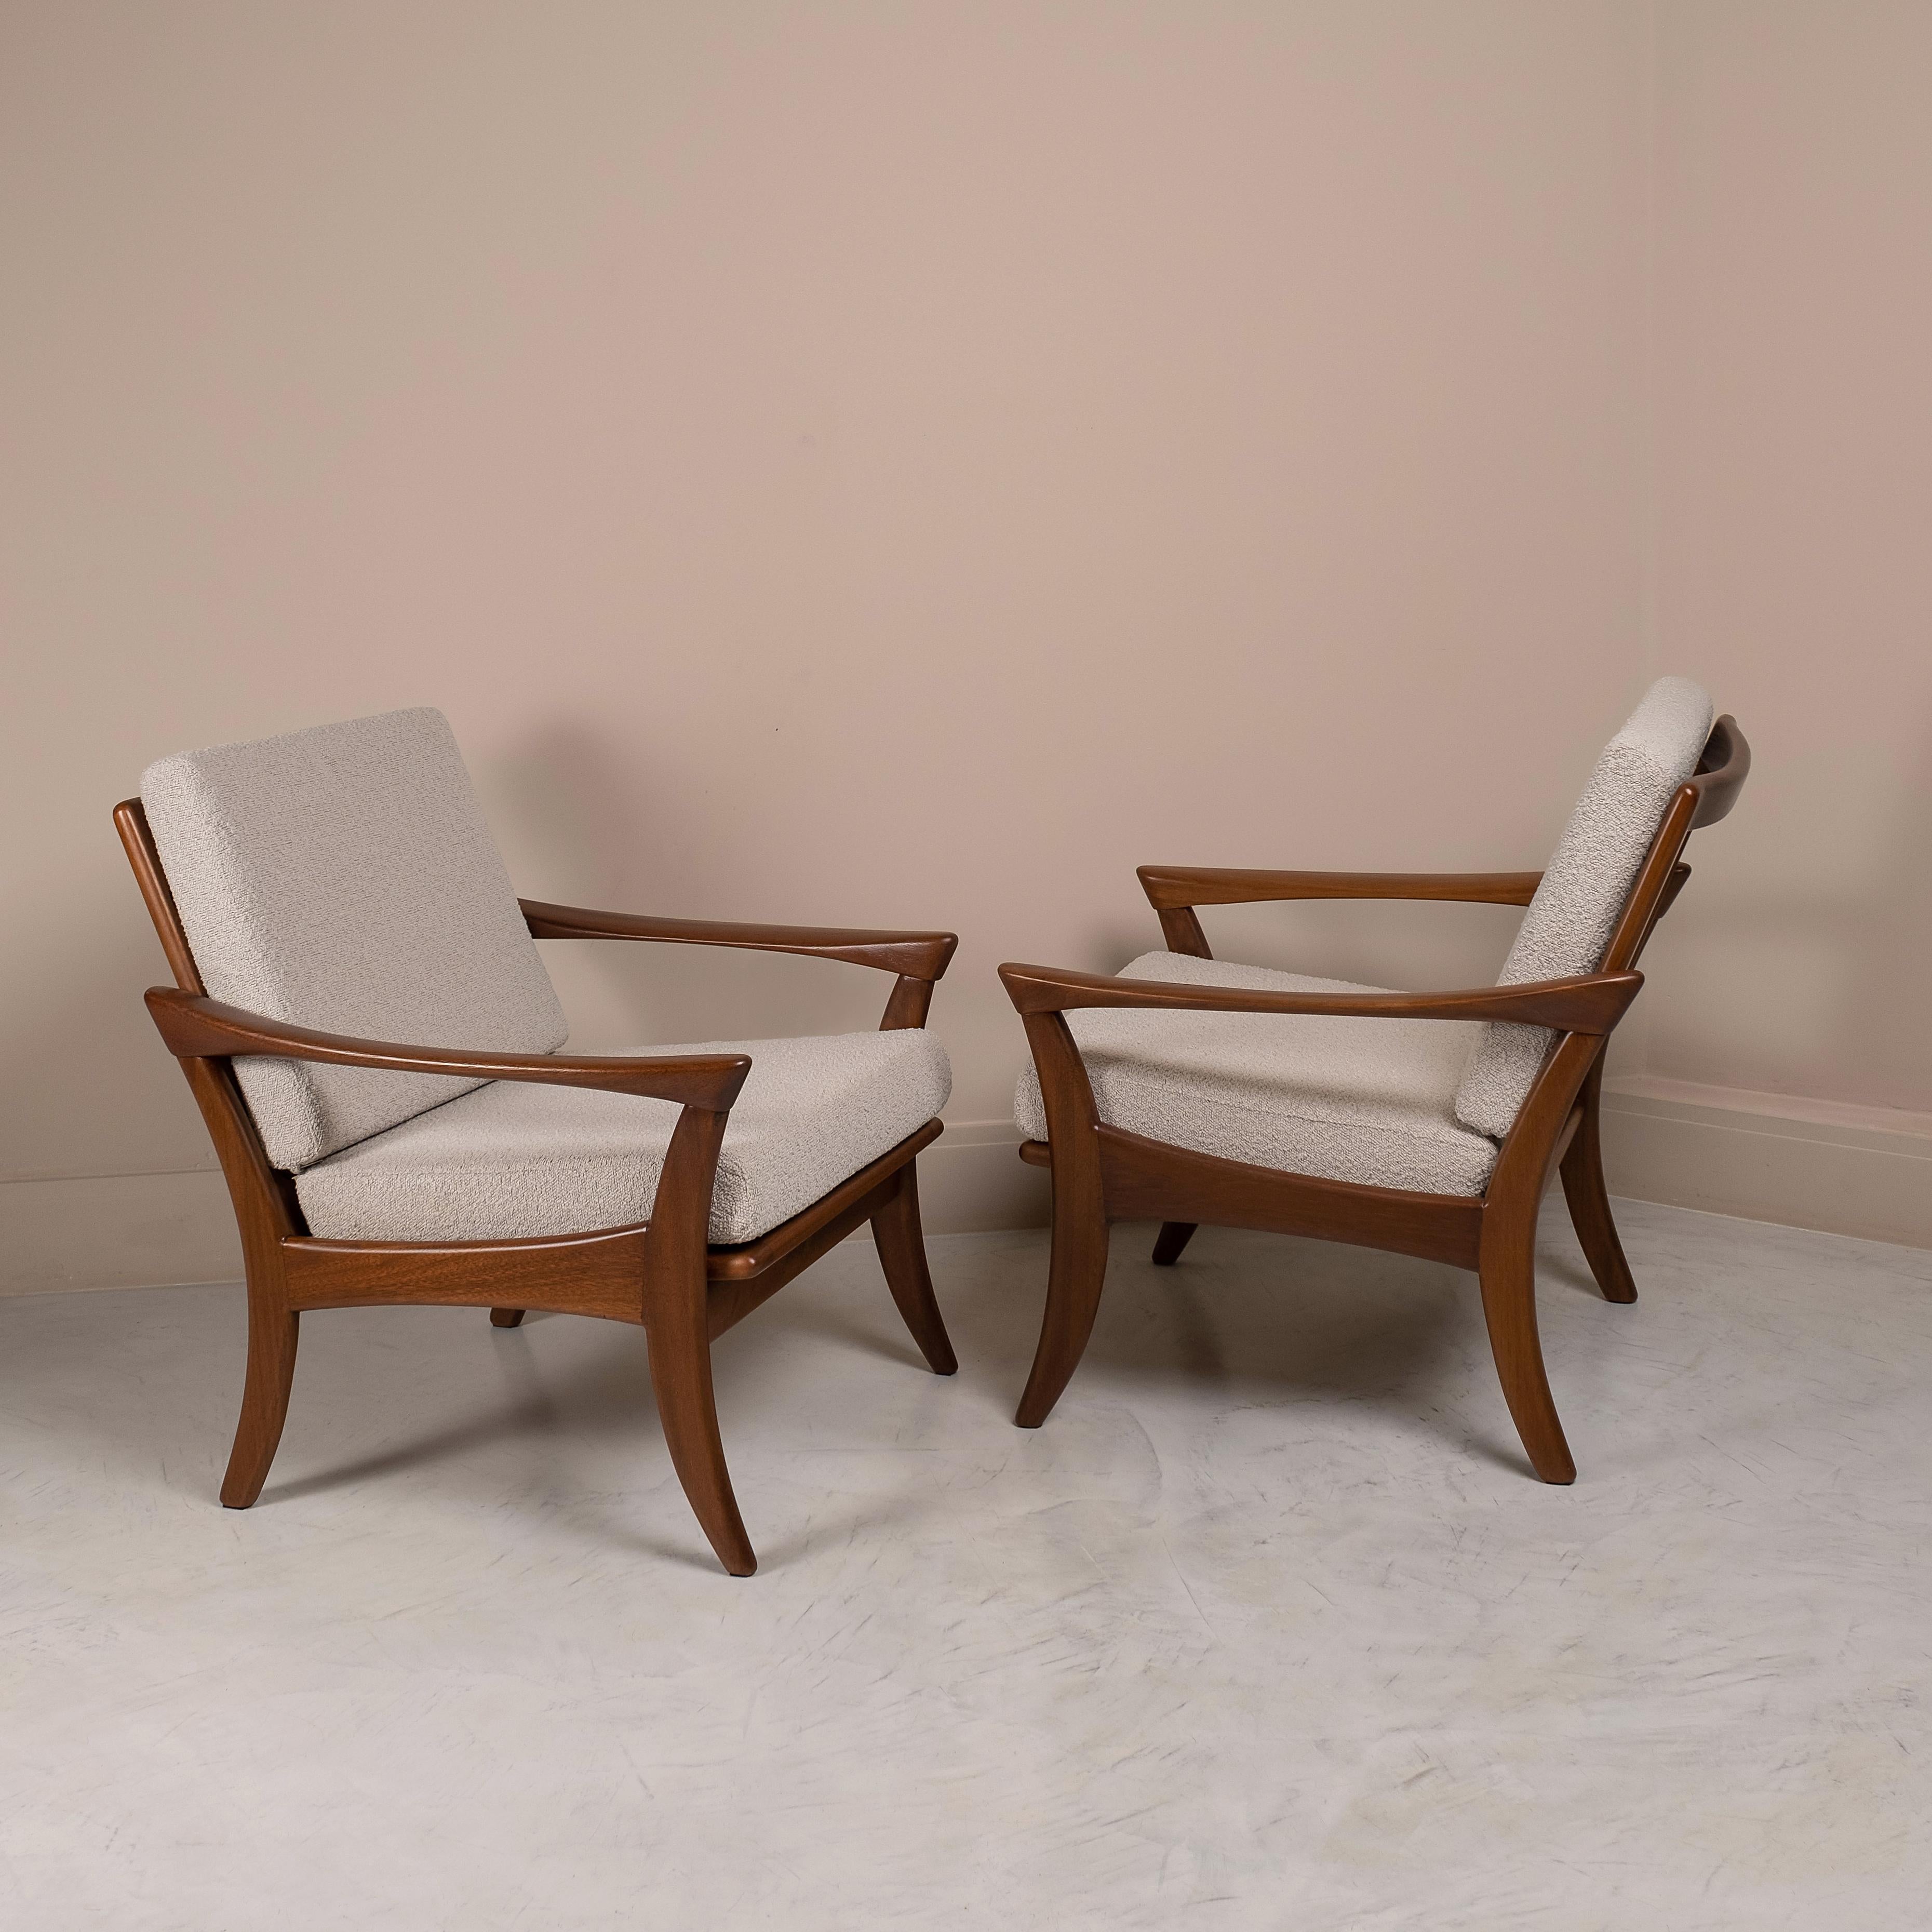 Beautiful pair of armchairs by De Ster Gelderland made in  Netherlands in the 50/60s
Teak wood frame completely restored.
The original latex straps on the seats have been replaced with leather ones.
Brand new upholstered  in premium beige bouclé